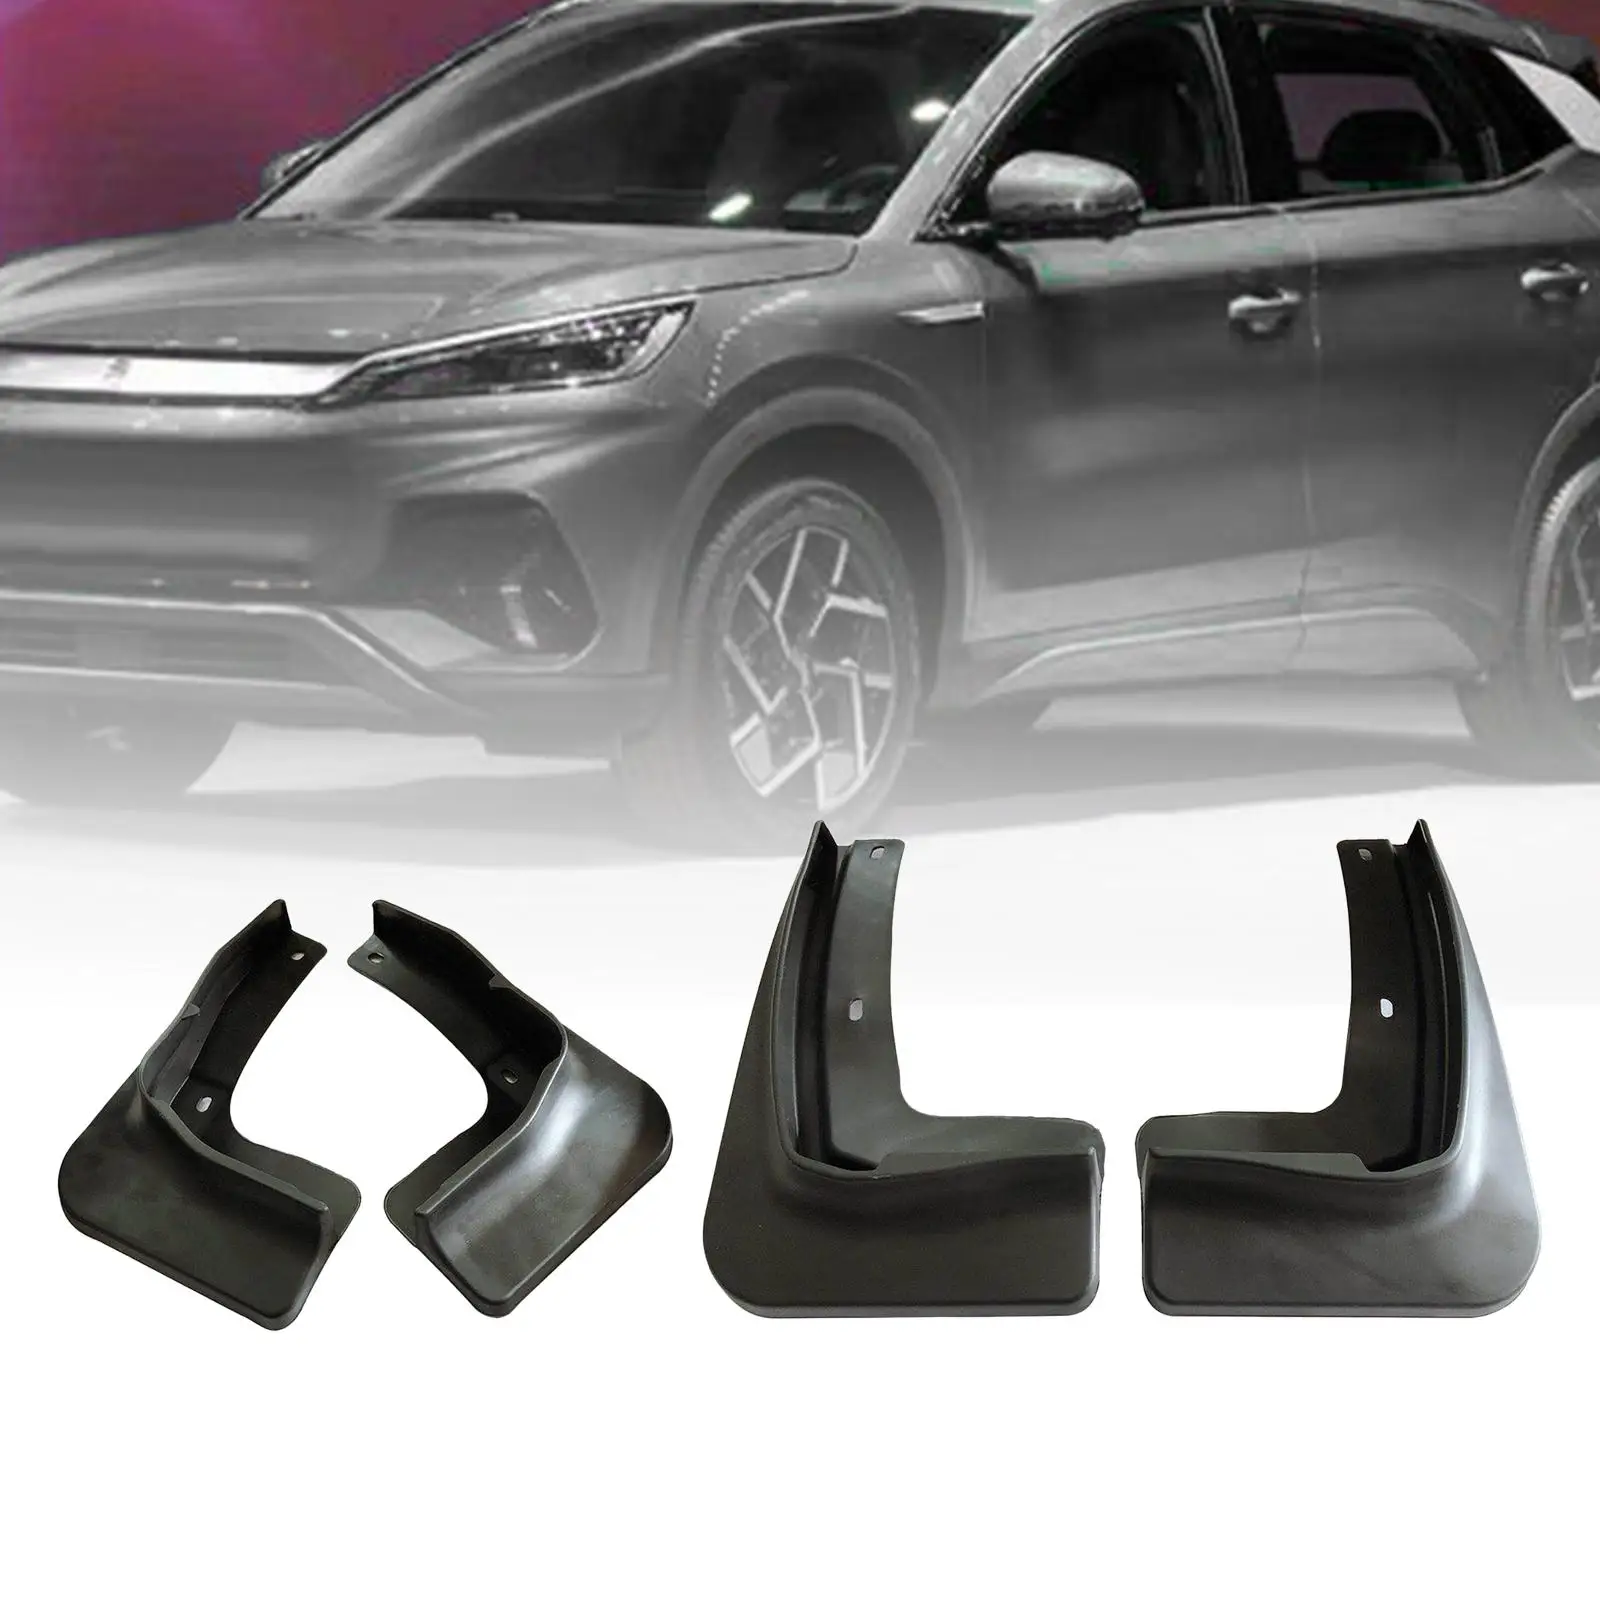 4 Pieces Car Mudguard Accessory Replaces Parts Front Rear for Byd Yuan Plus